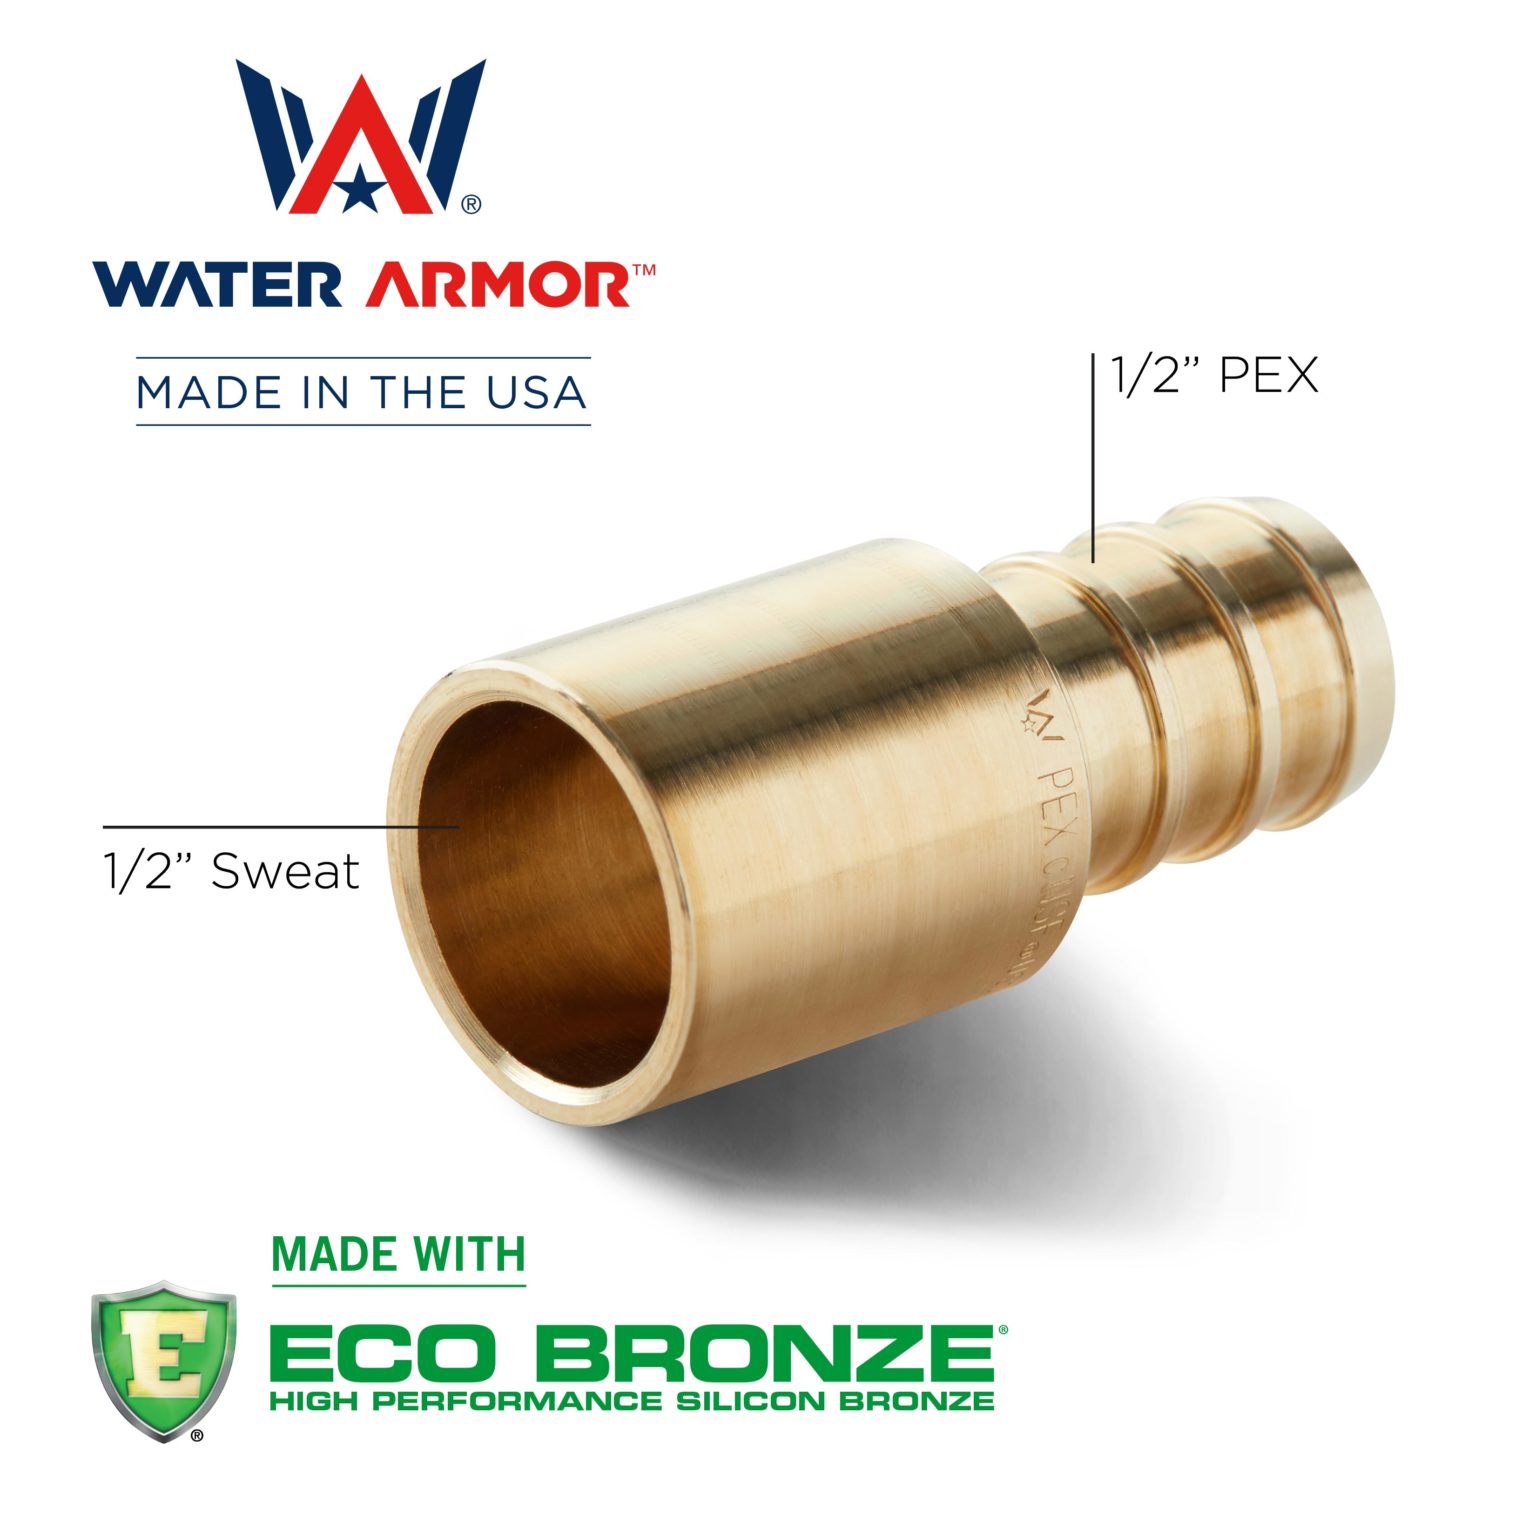 1/2" x 1/2" Water Armor Lead Free PEX Male Sweat Adapter Made With Eco Bronze